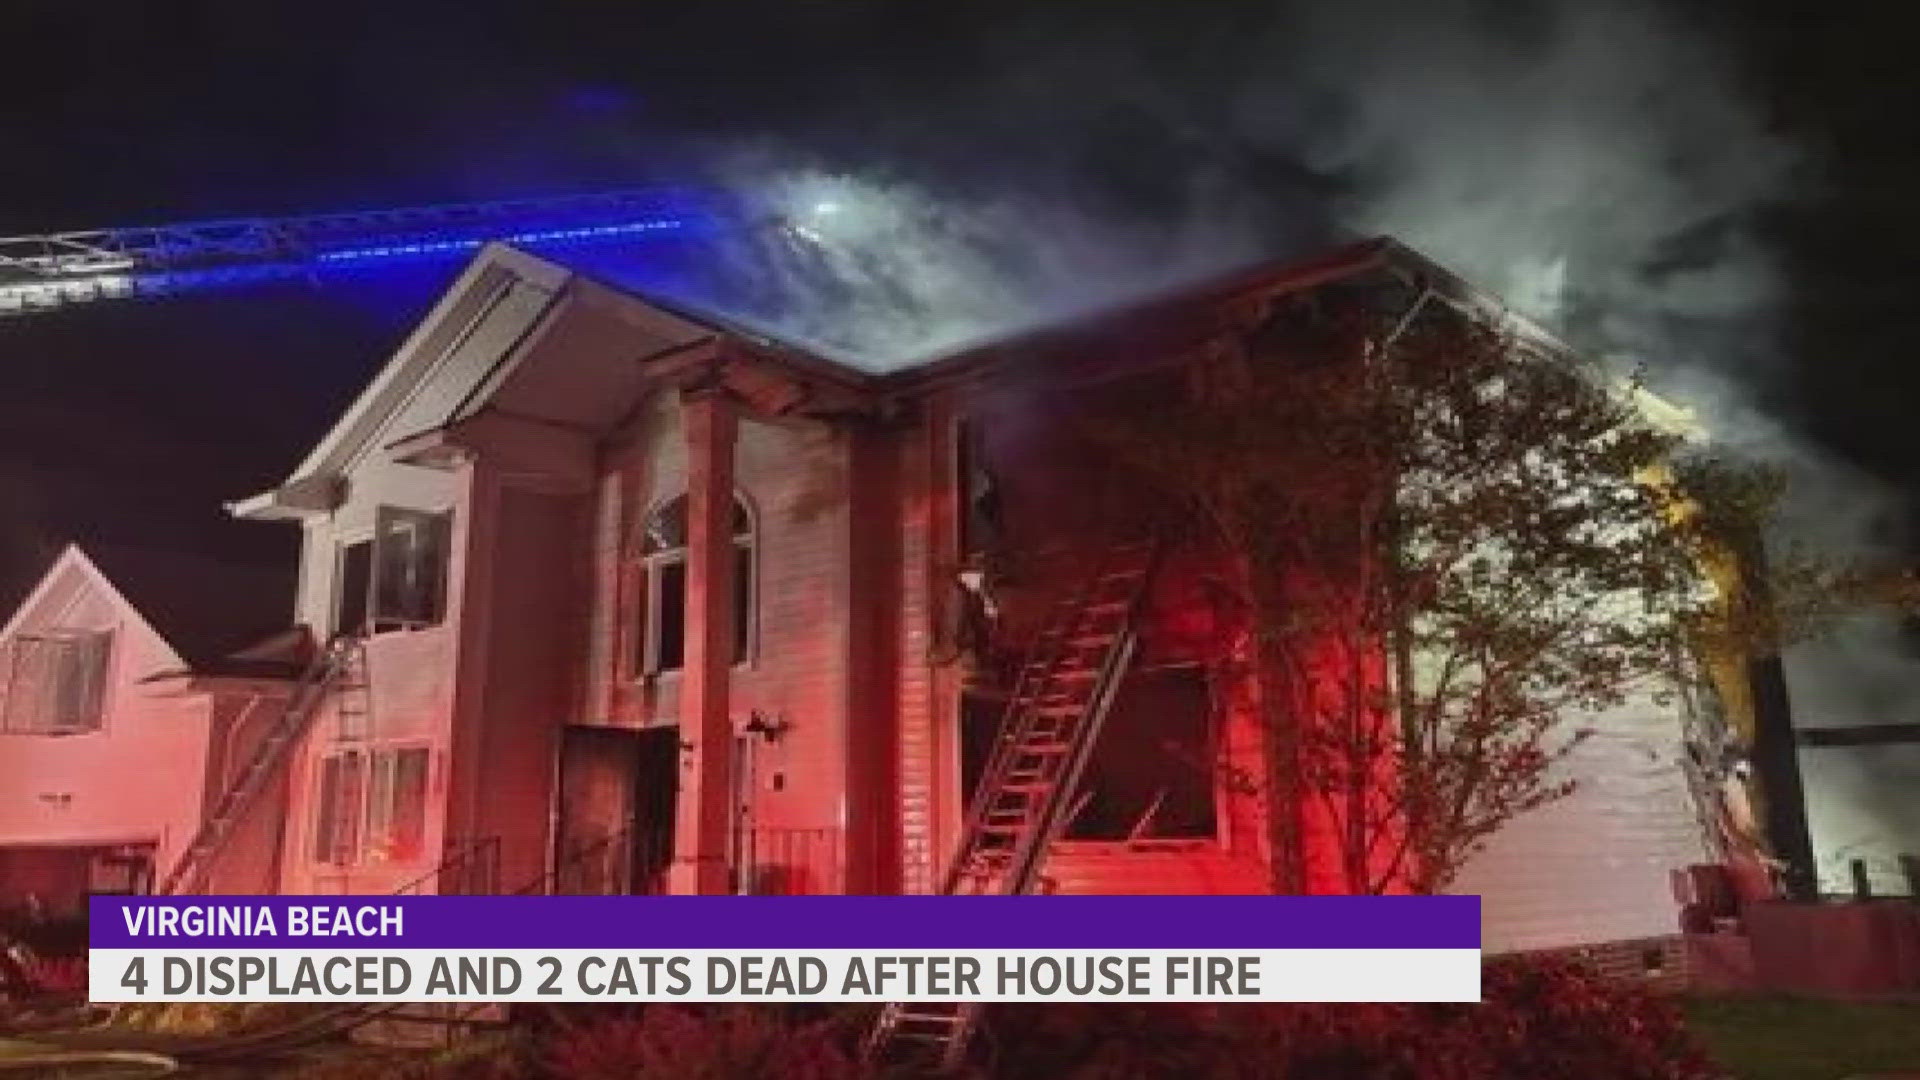 Officials say no one was hurt but two cats died.